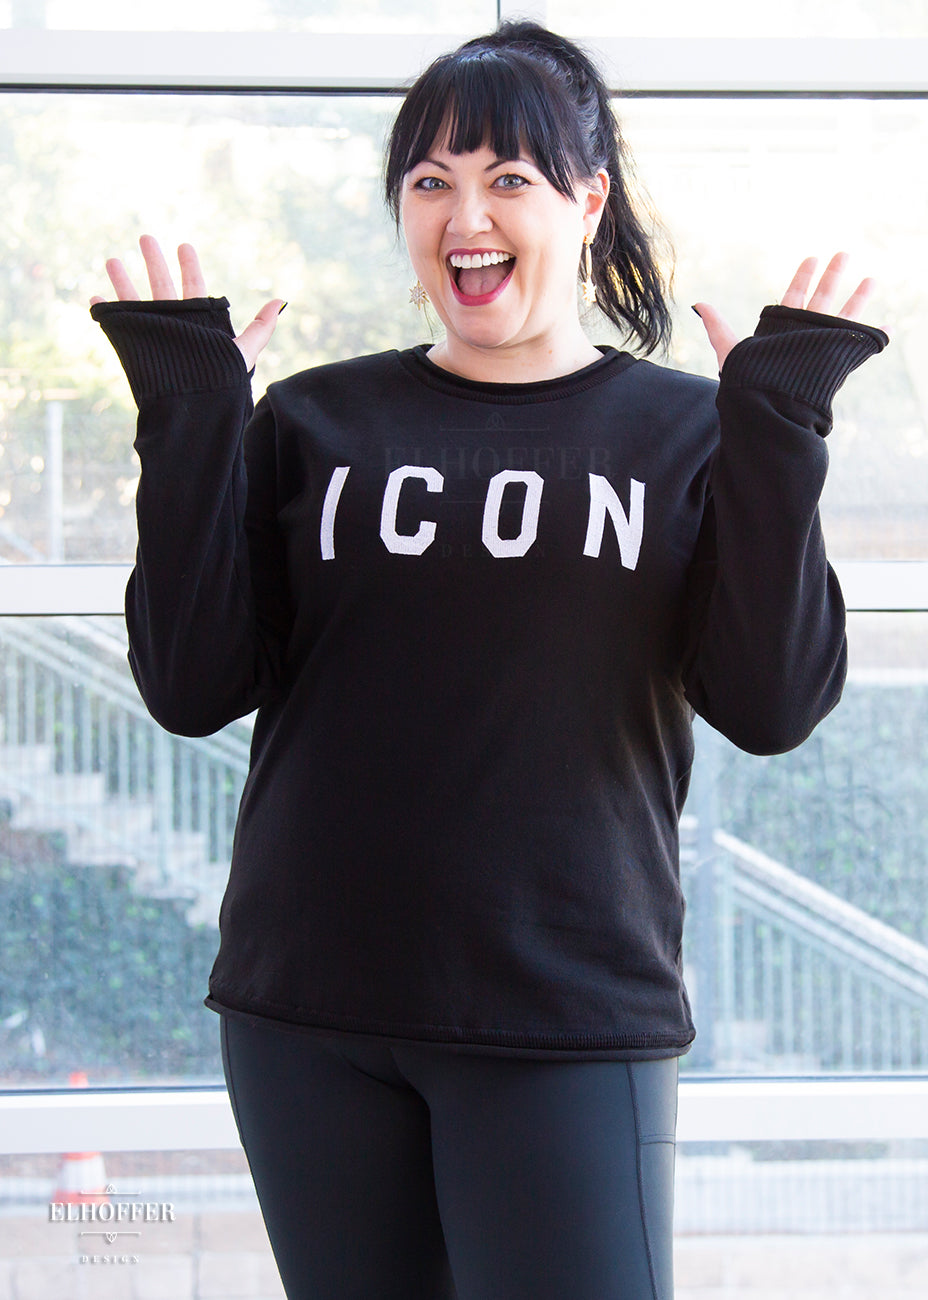 Bernadette, a fair skinned L model with long dark brown hair pulled up in a pony tail and bangs, is smiling with her hands up to show off the thumbholes in the cuffs of the XL sample of a black unisex sweater that has white bold embroidered letters that spell ICON and has long sleeves. The sweater also has a rolled hem on both the neckline and around the cuffs. The XL sample makes the sweater look like a relaxed fit, she would get her normal L size if she wanted it more fitted.